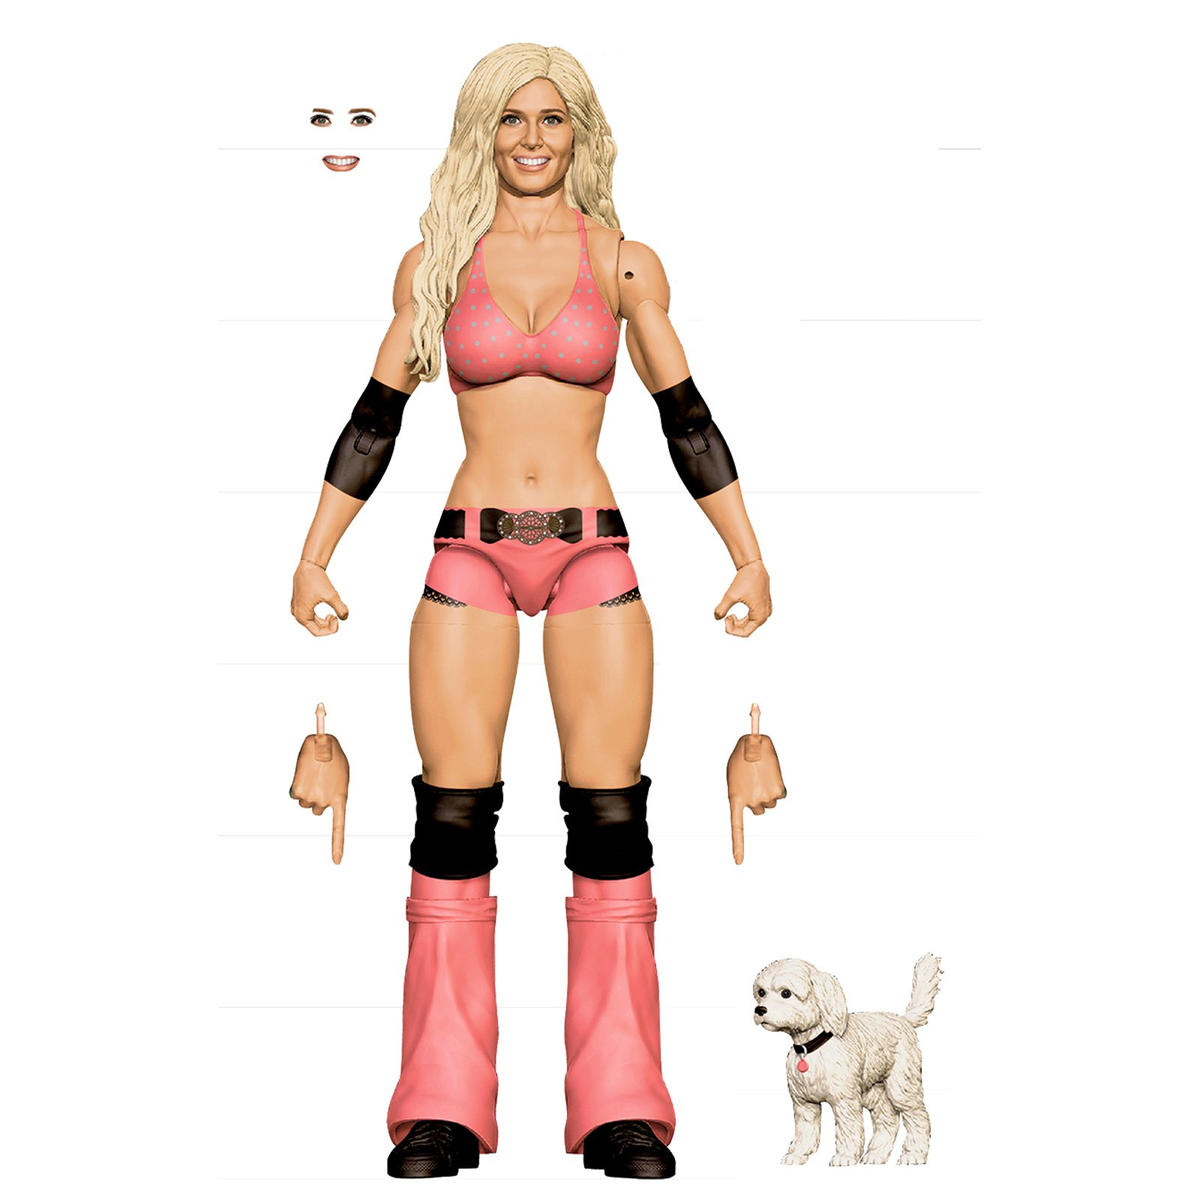 2023 WWE Mattel Elite Collection Best of Ruthless Aggression Series 5 Torrie Wilson [Exclusive]